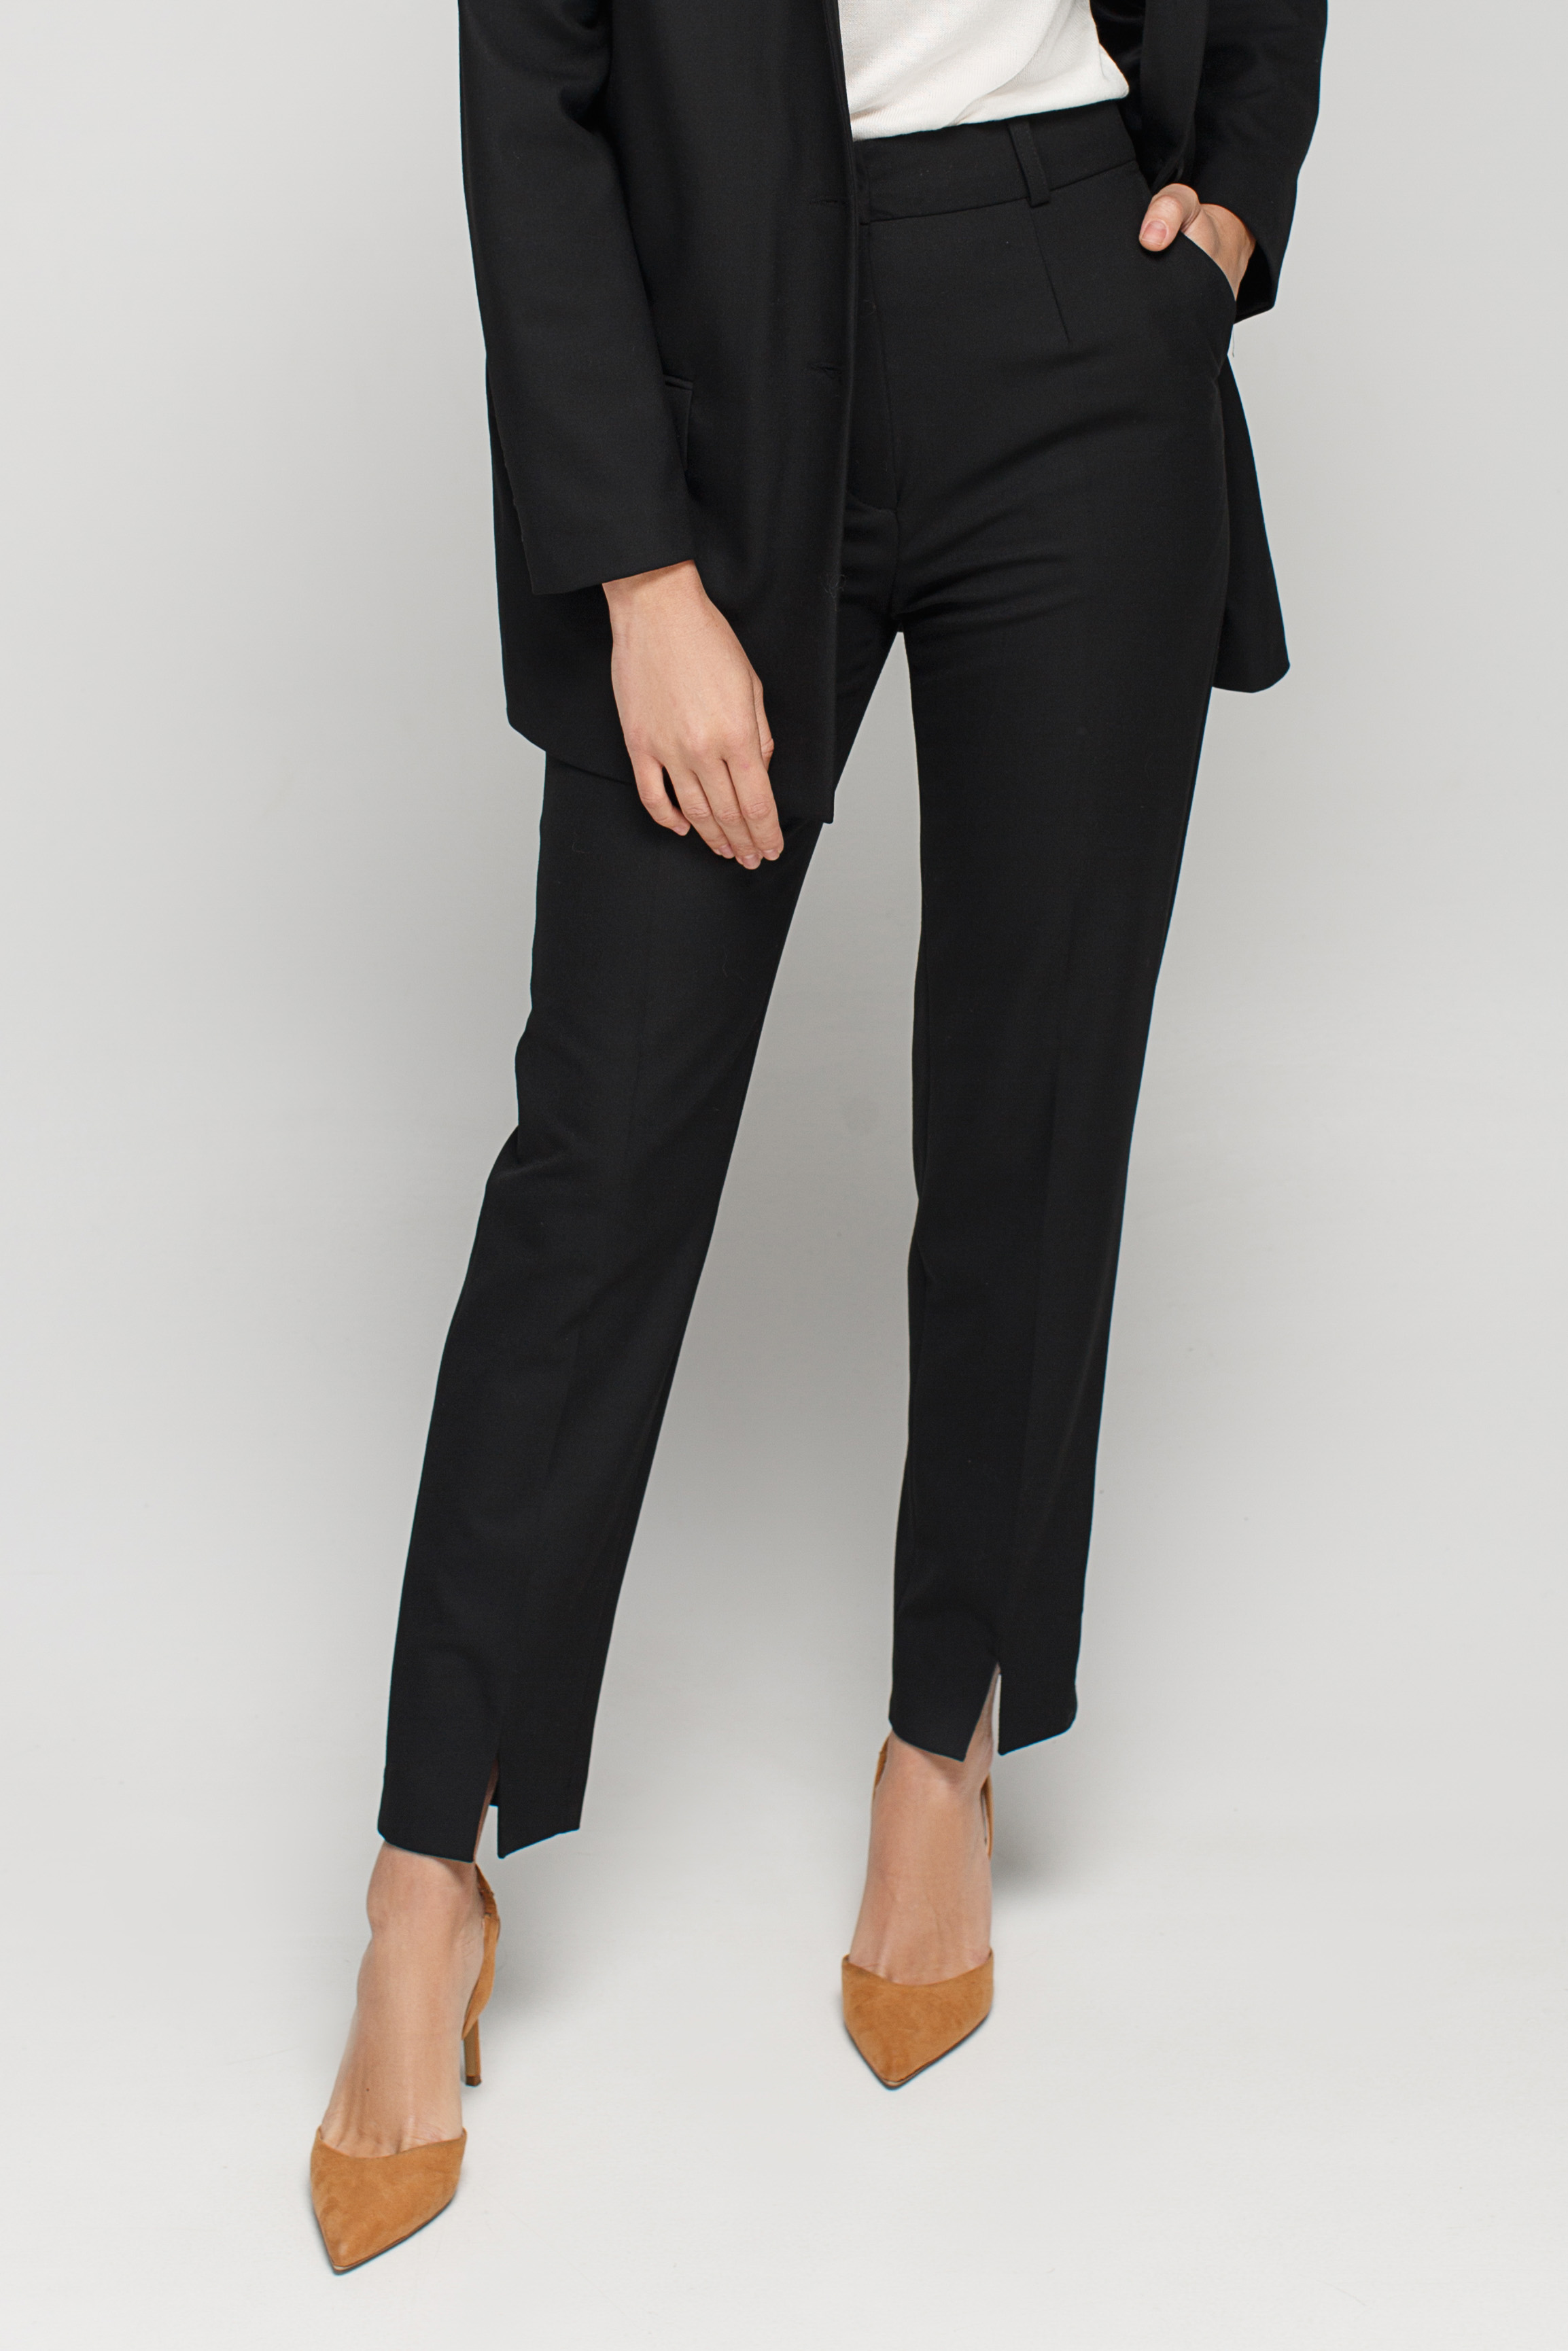 Black straight pants with front slits , photo 2